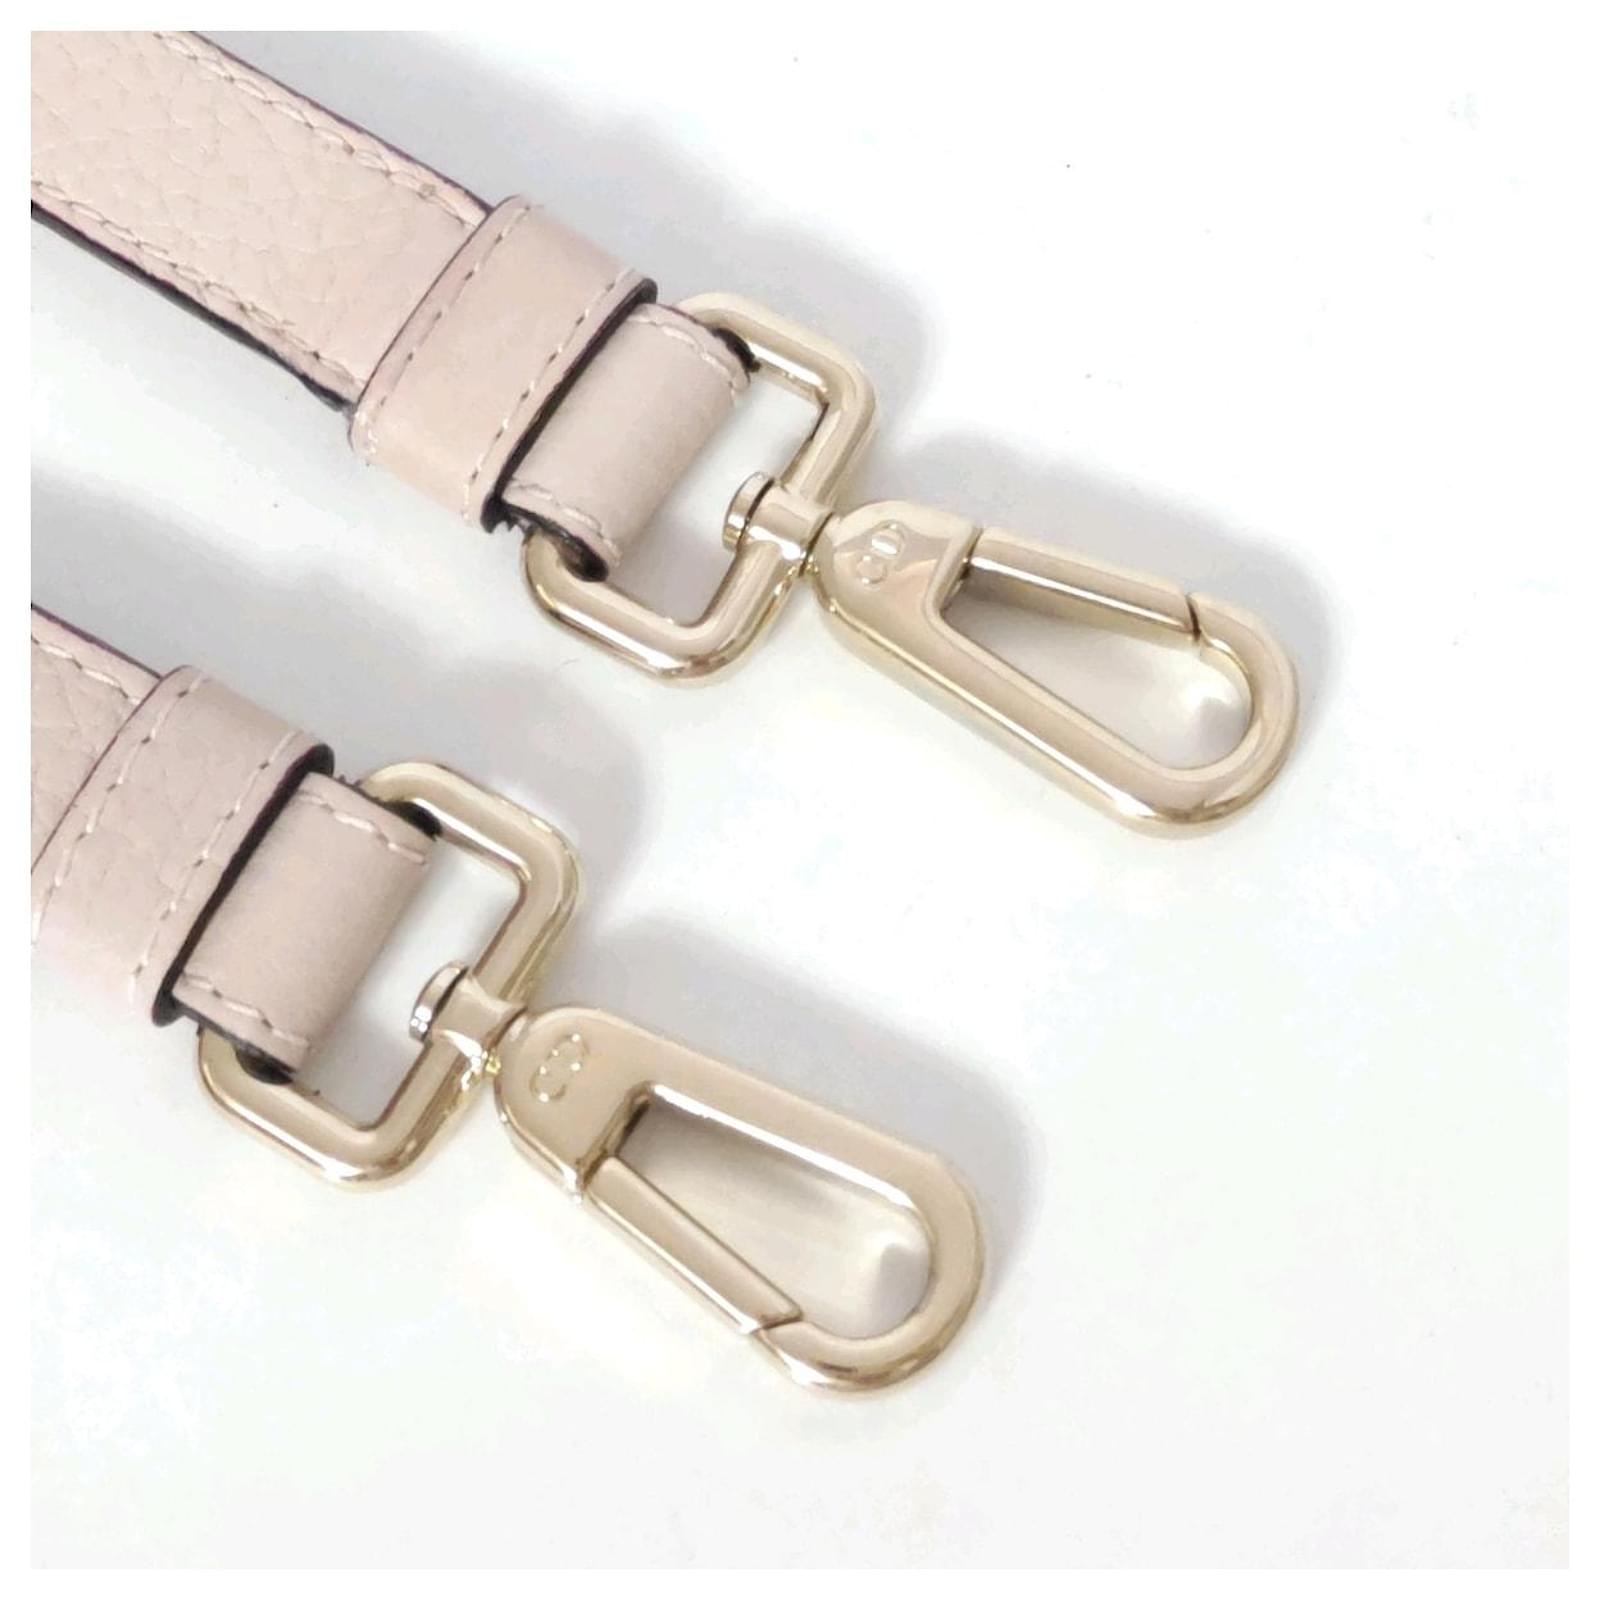 dior leather charms